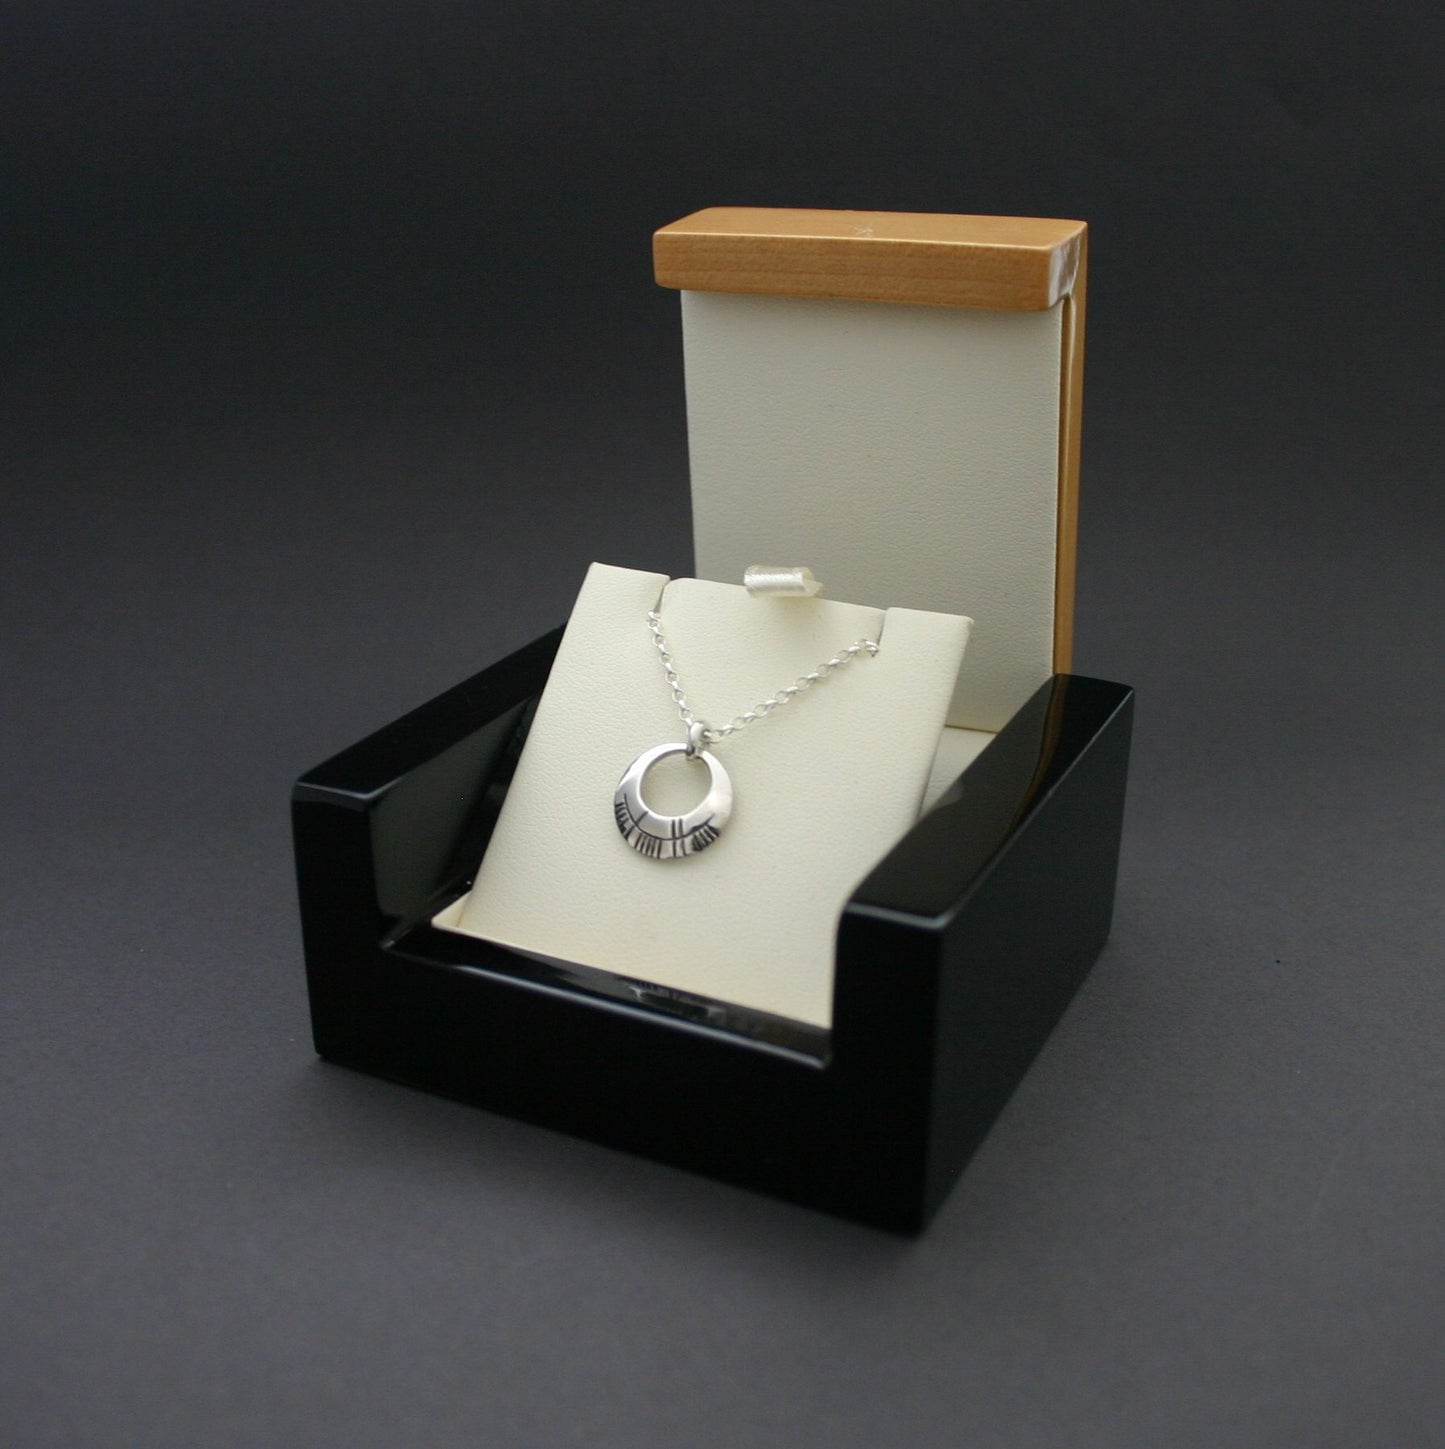 Happiness Sonas Ogham Necklace in box